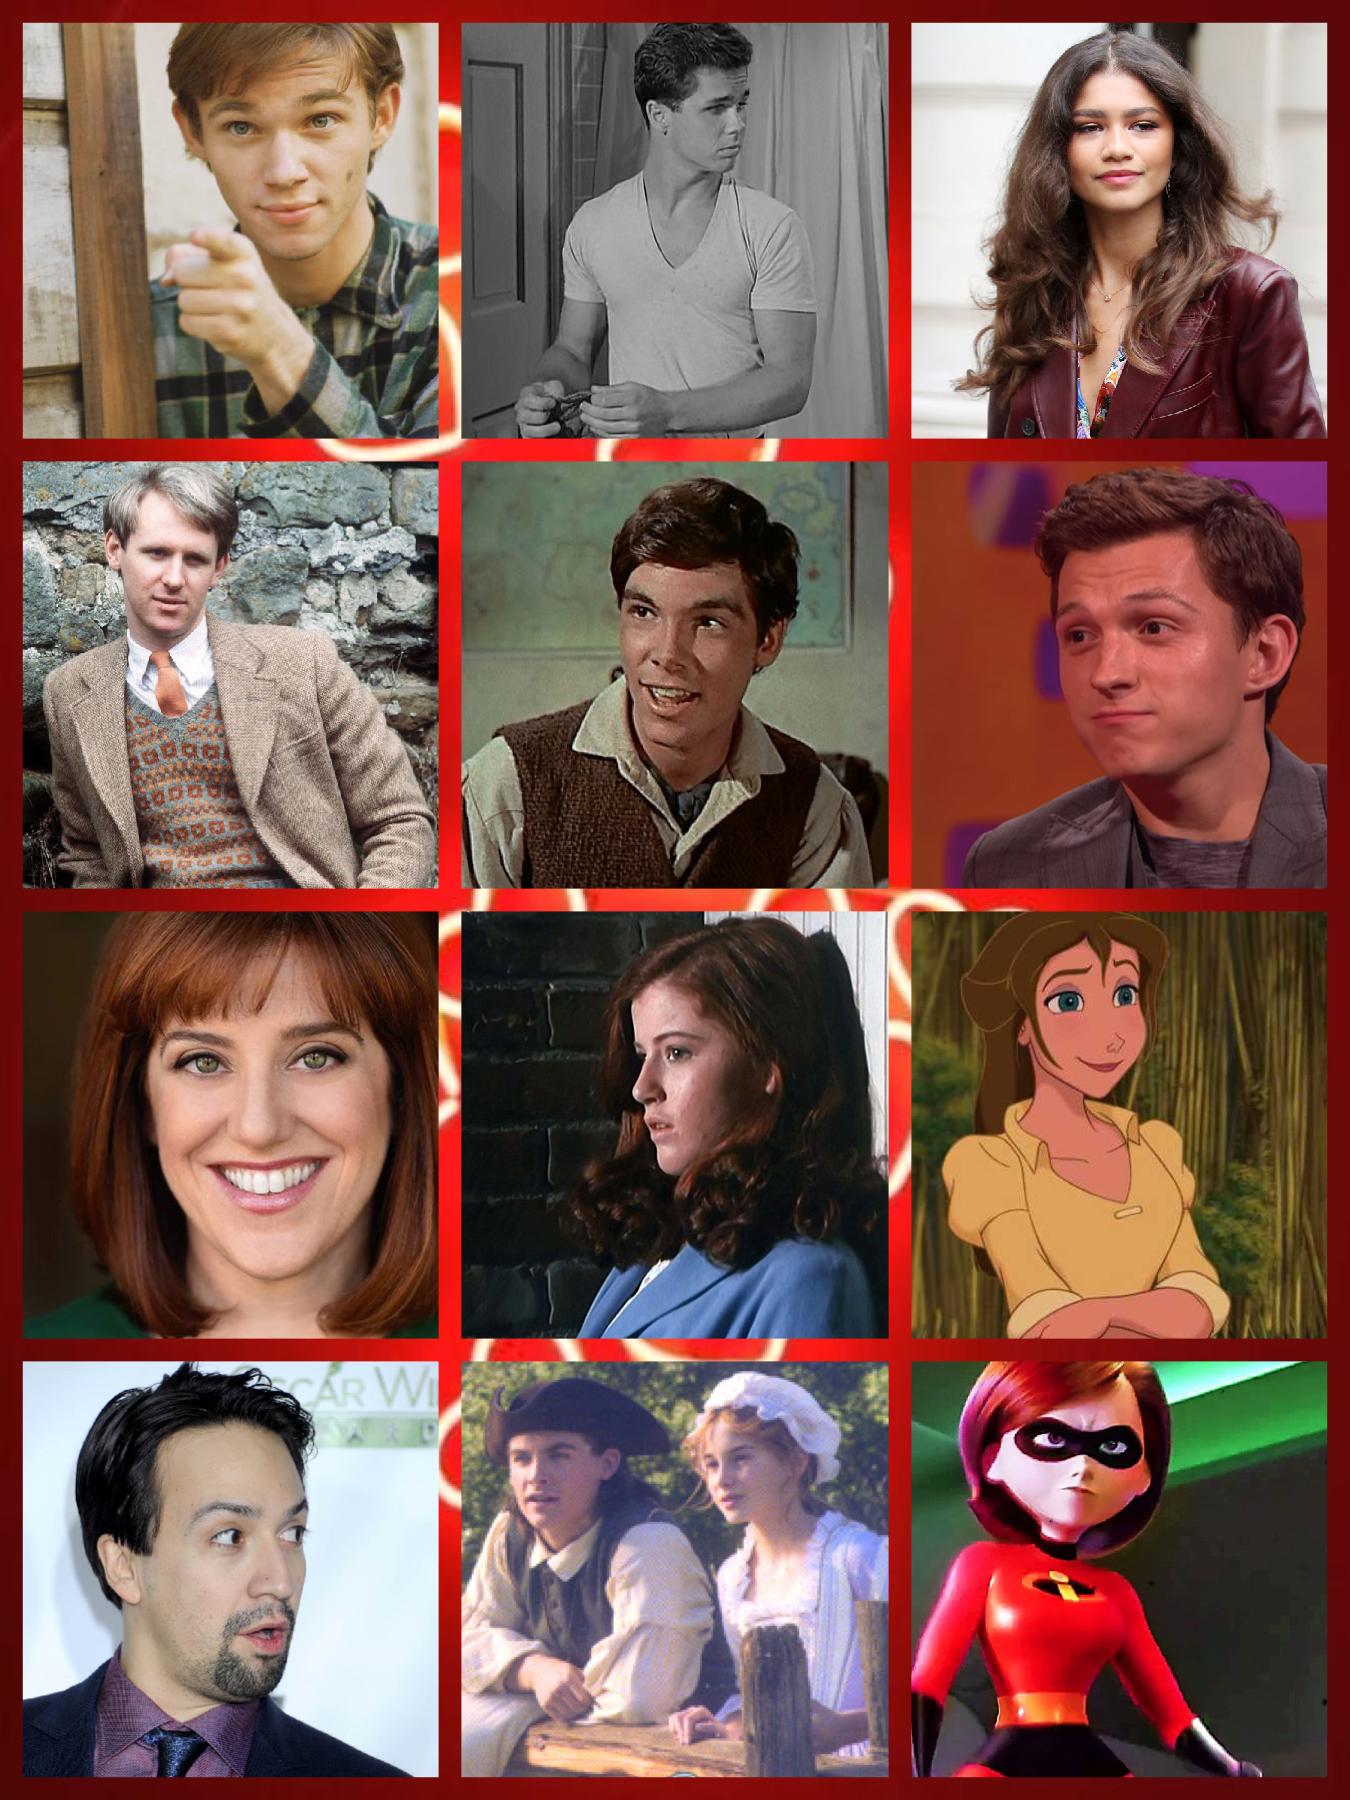 Fictional character/ celebrity crushes... oof.